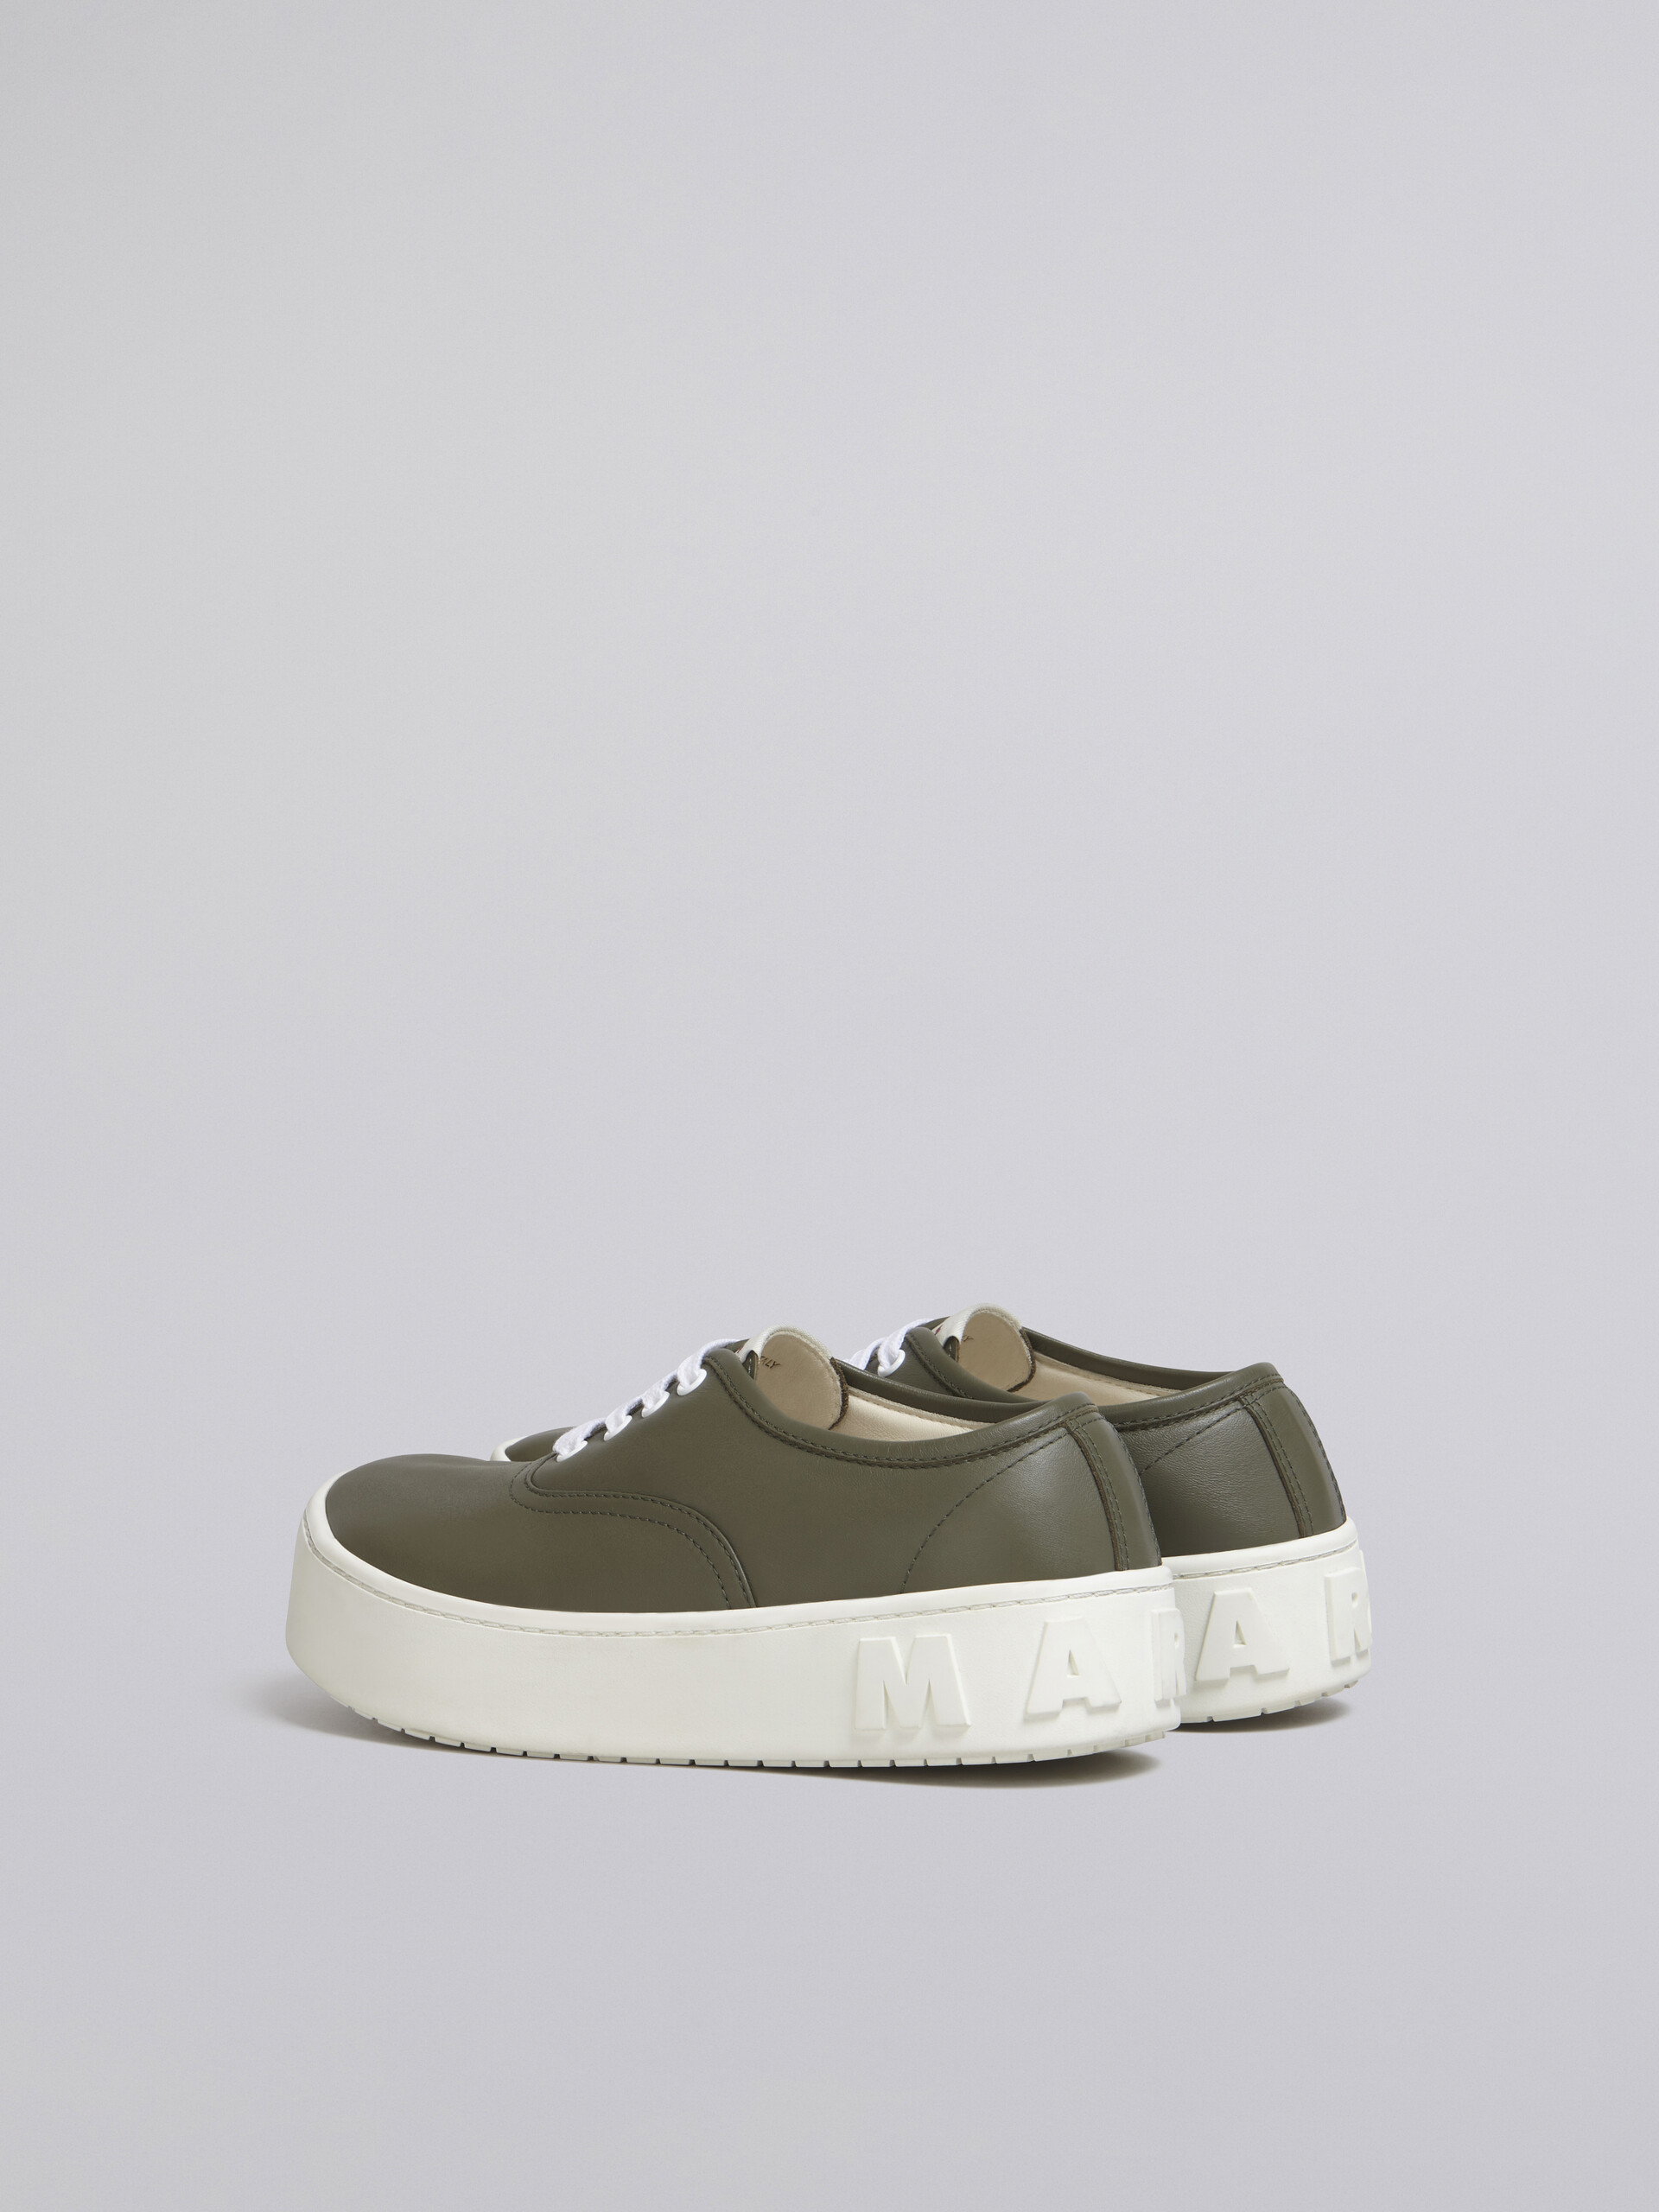 Green smooth calfskin sneaker with raised maxi Marni logo - Sneakers - Image 3